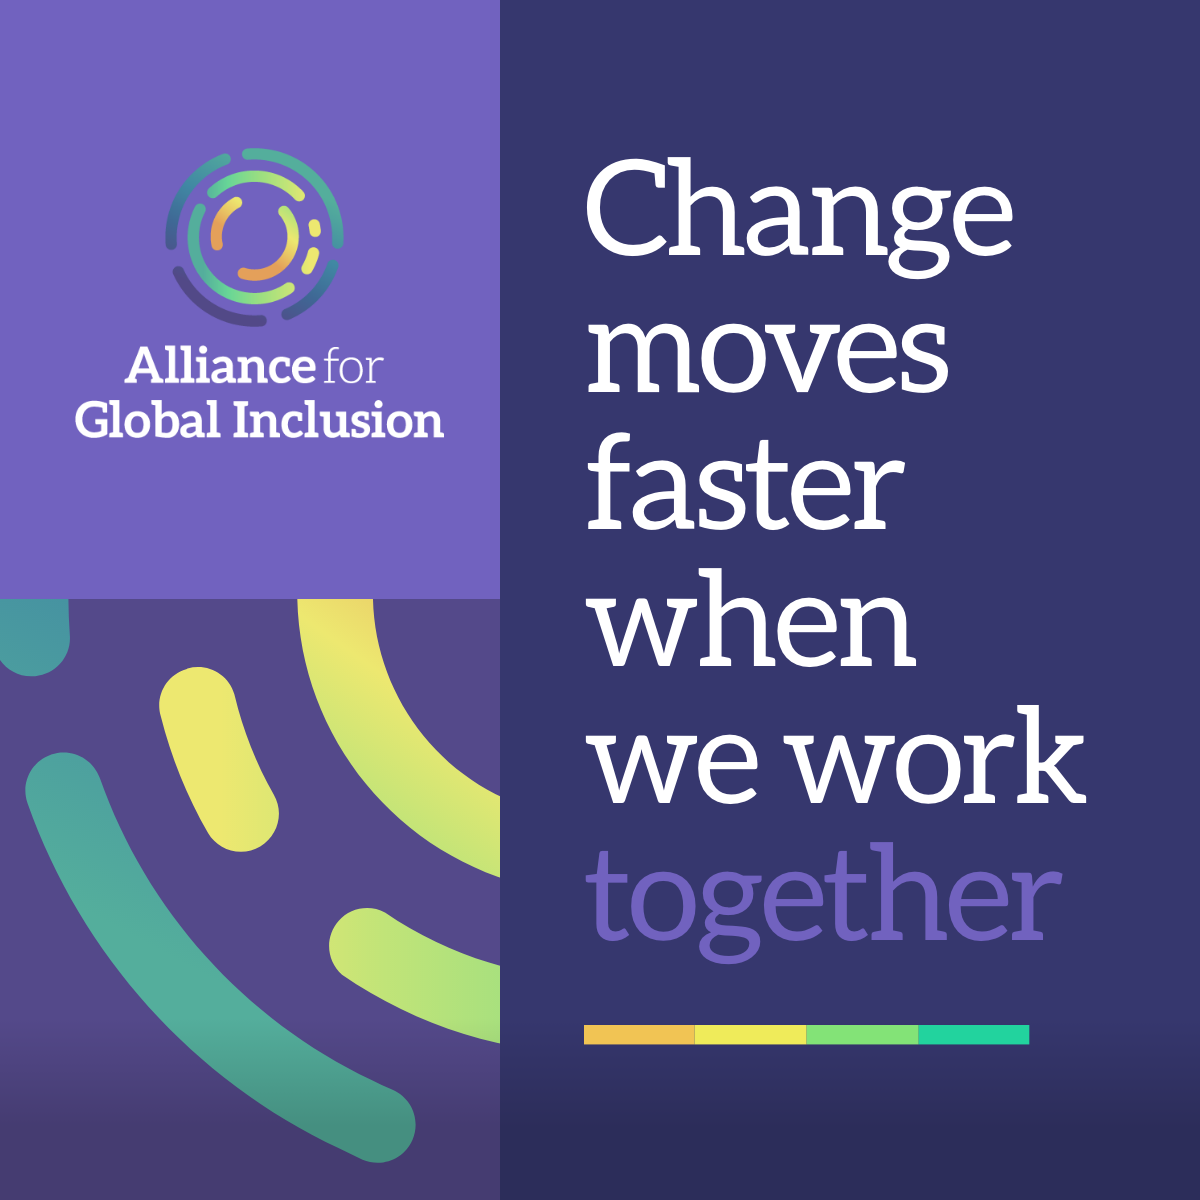 Alliance For Global Inclusion combination mark with the text "change moves faster when we work together", square